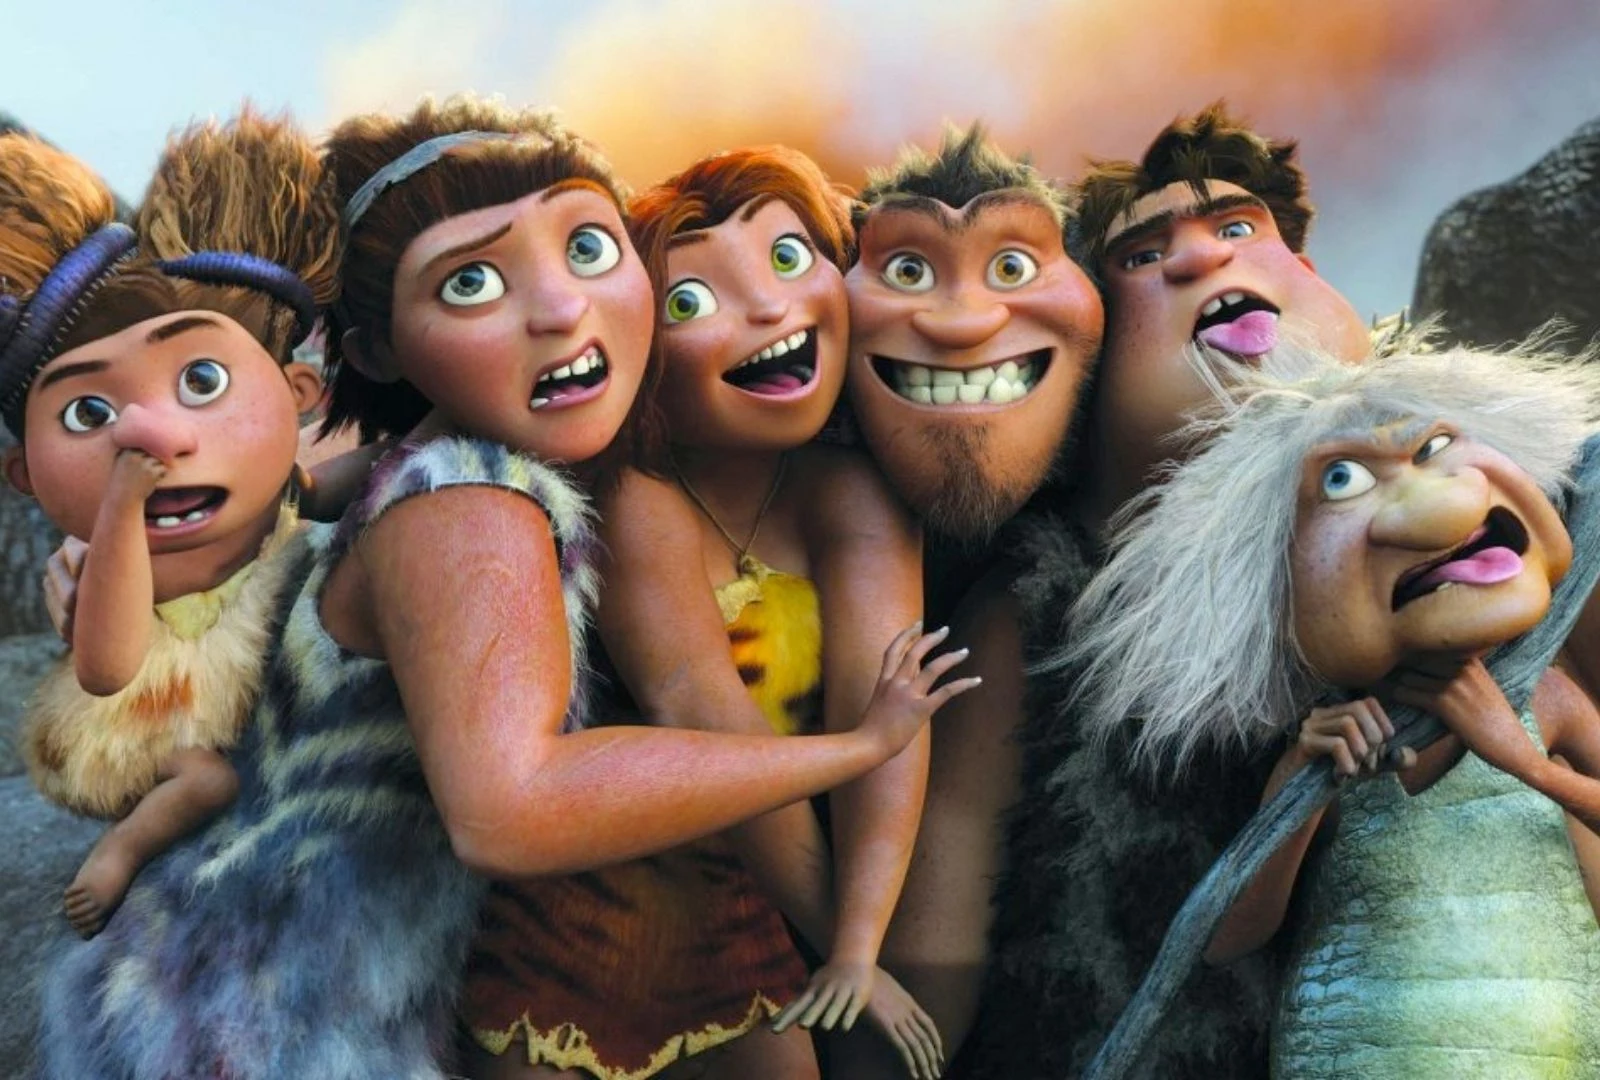 The Croods 2' Returns With Long-Awaited First Trailer